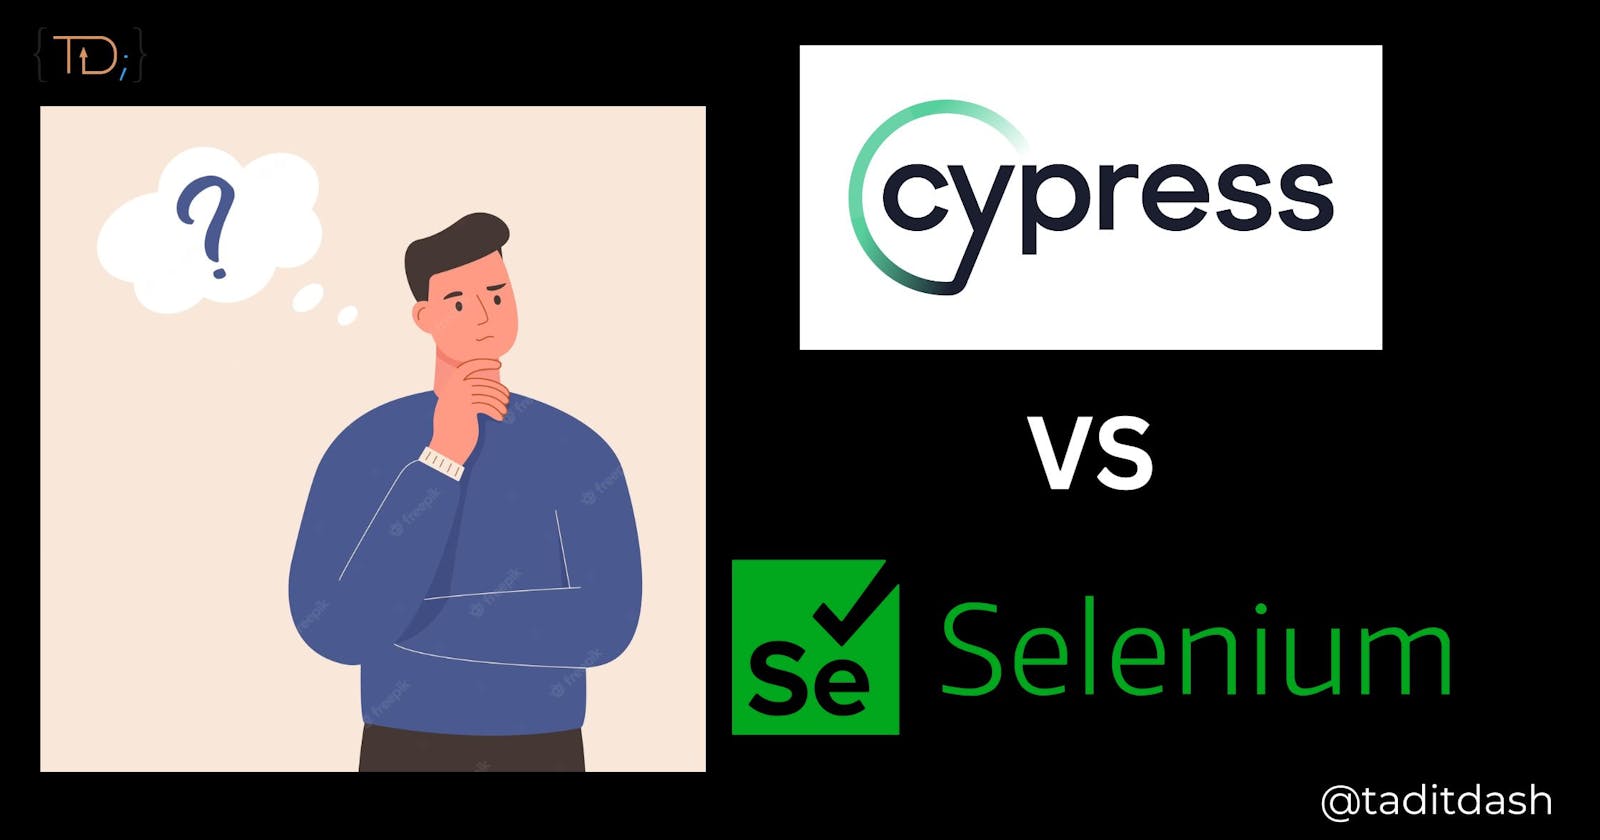 A Study on End-to-End Testing Framework Cypress in comparison to Selenium